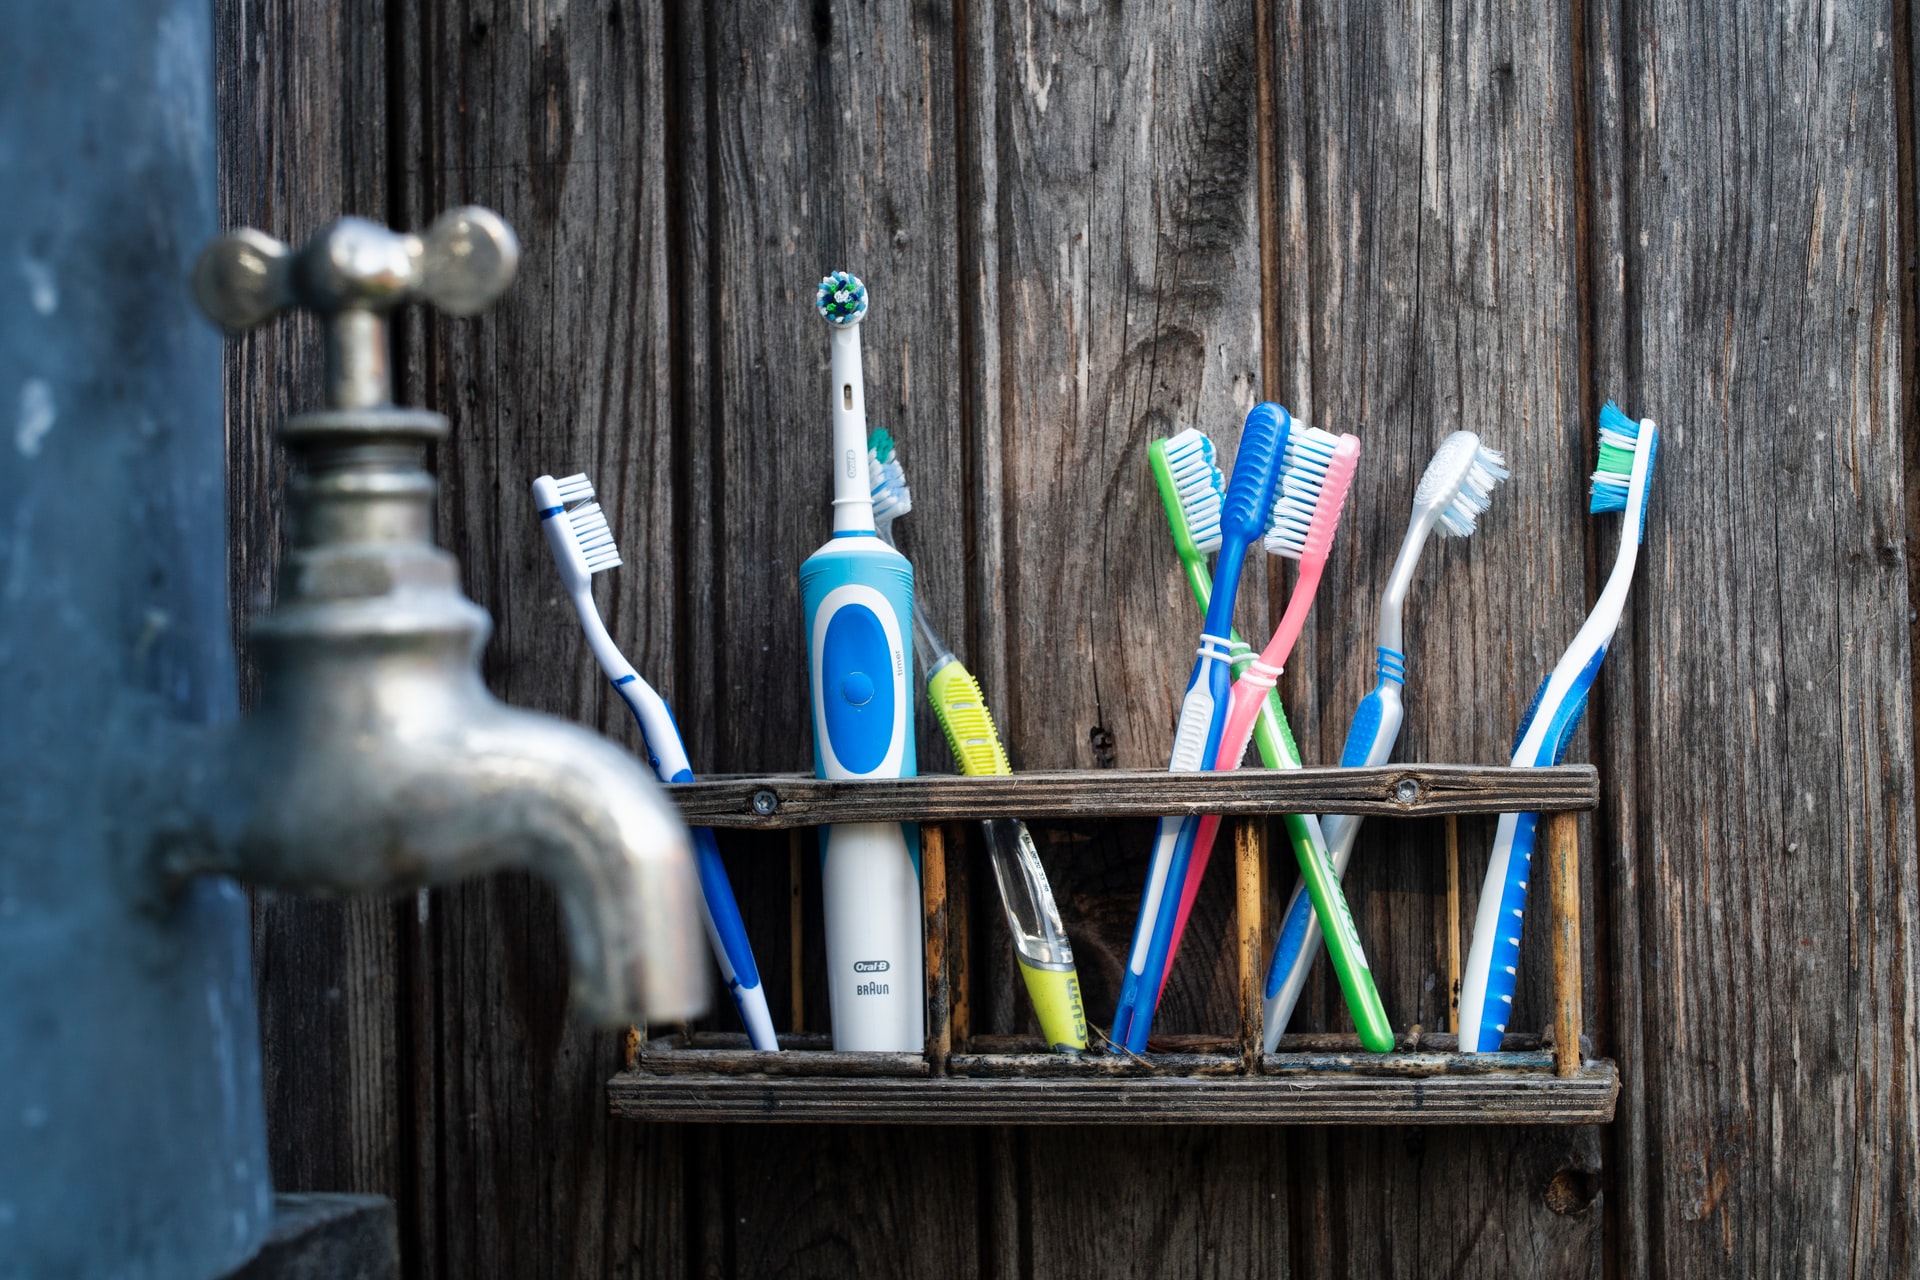 A wooden shelf of toothbrushes in assorted colors by a faucet